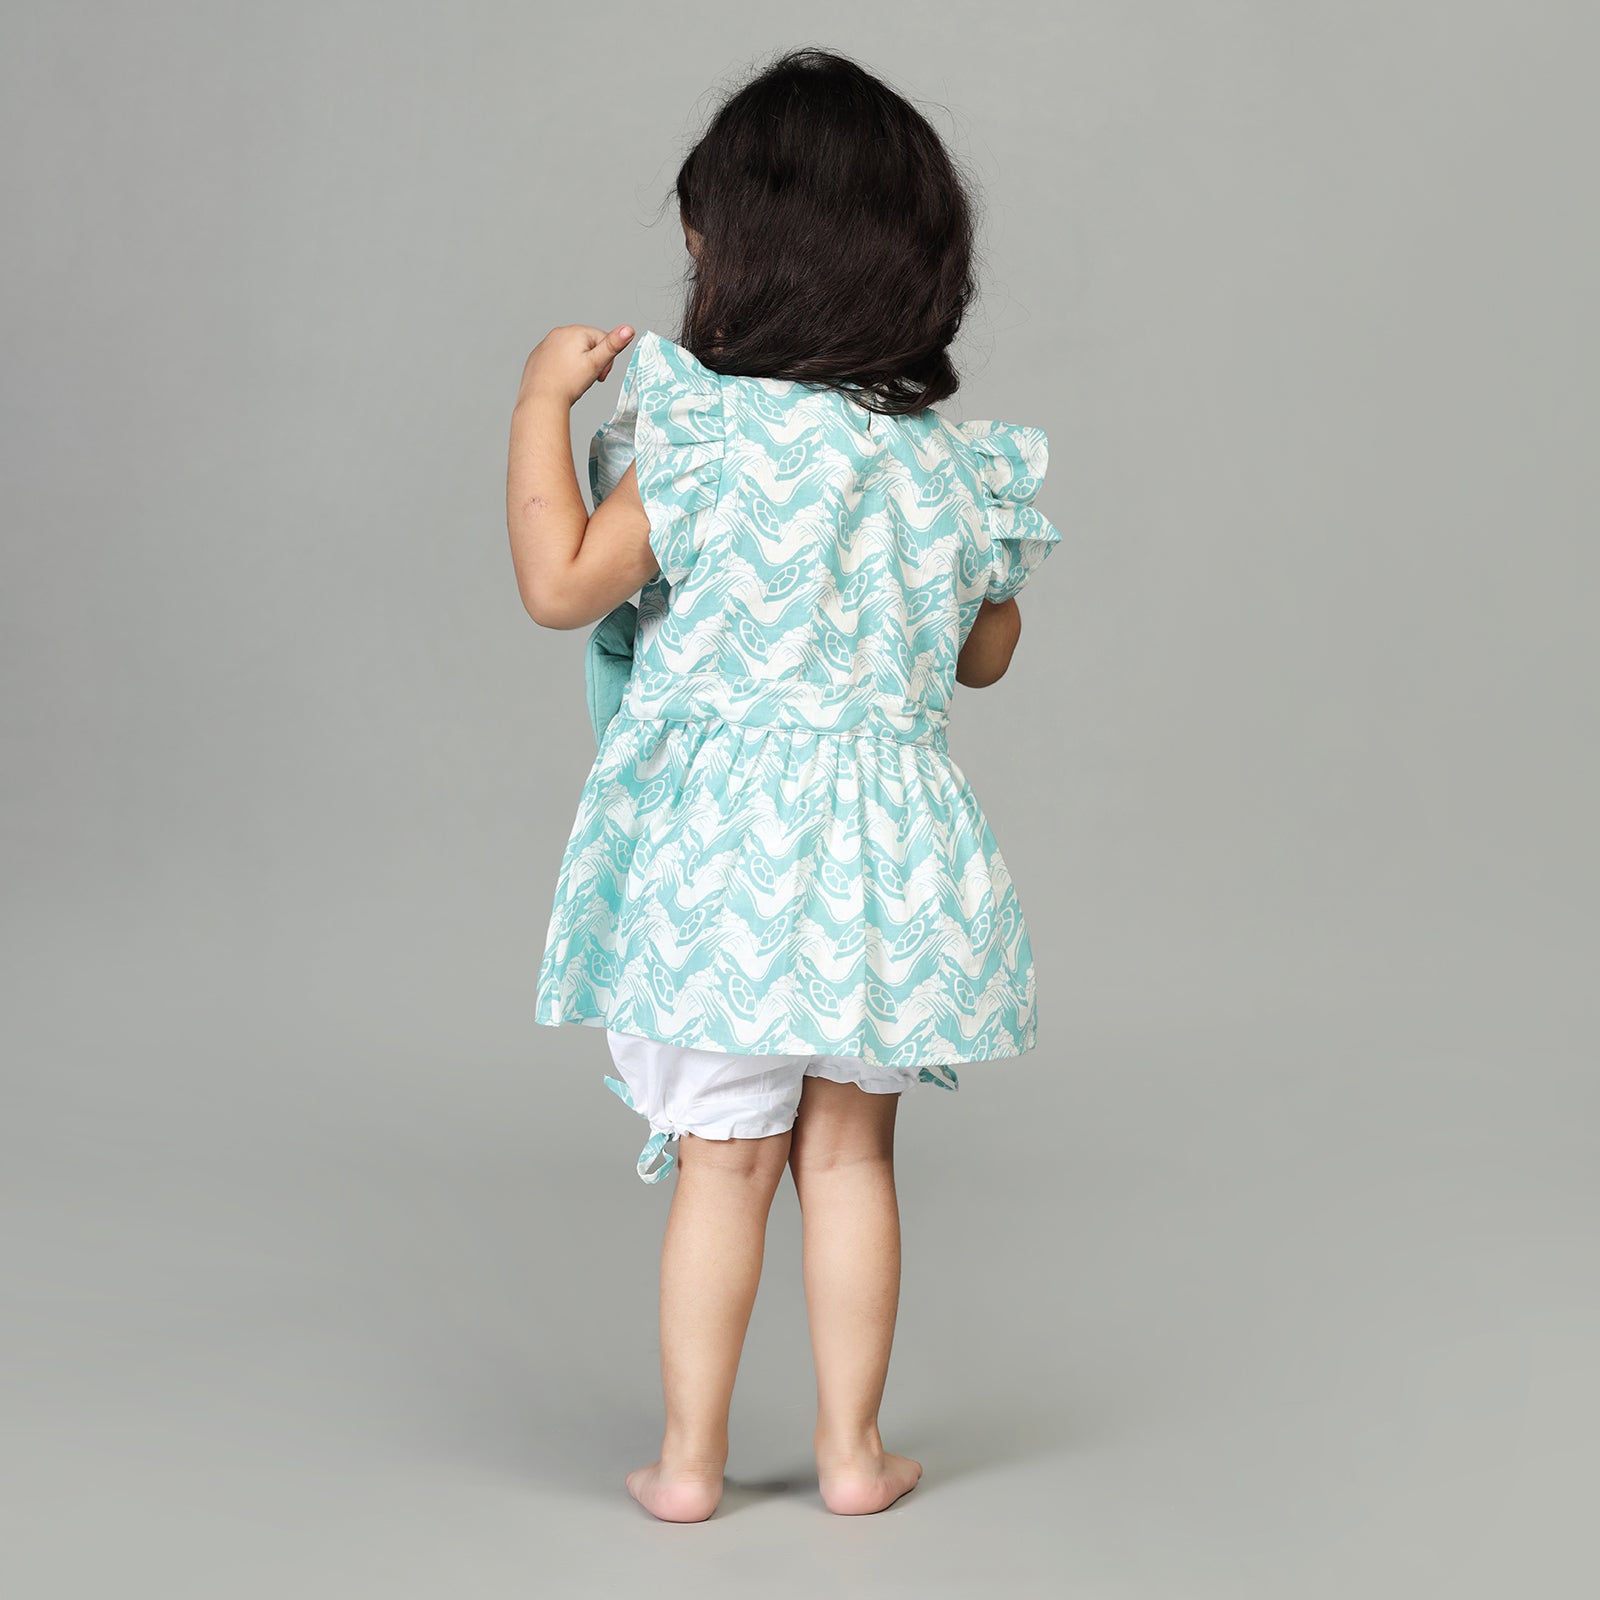 Cotton Flared Top with Balloon Shorts For Girls with The Talkative Turtle Print